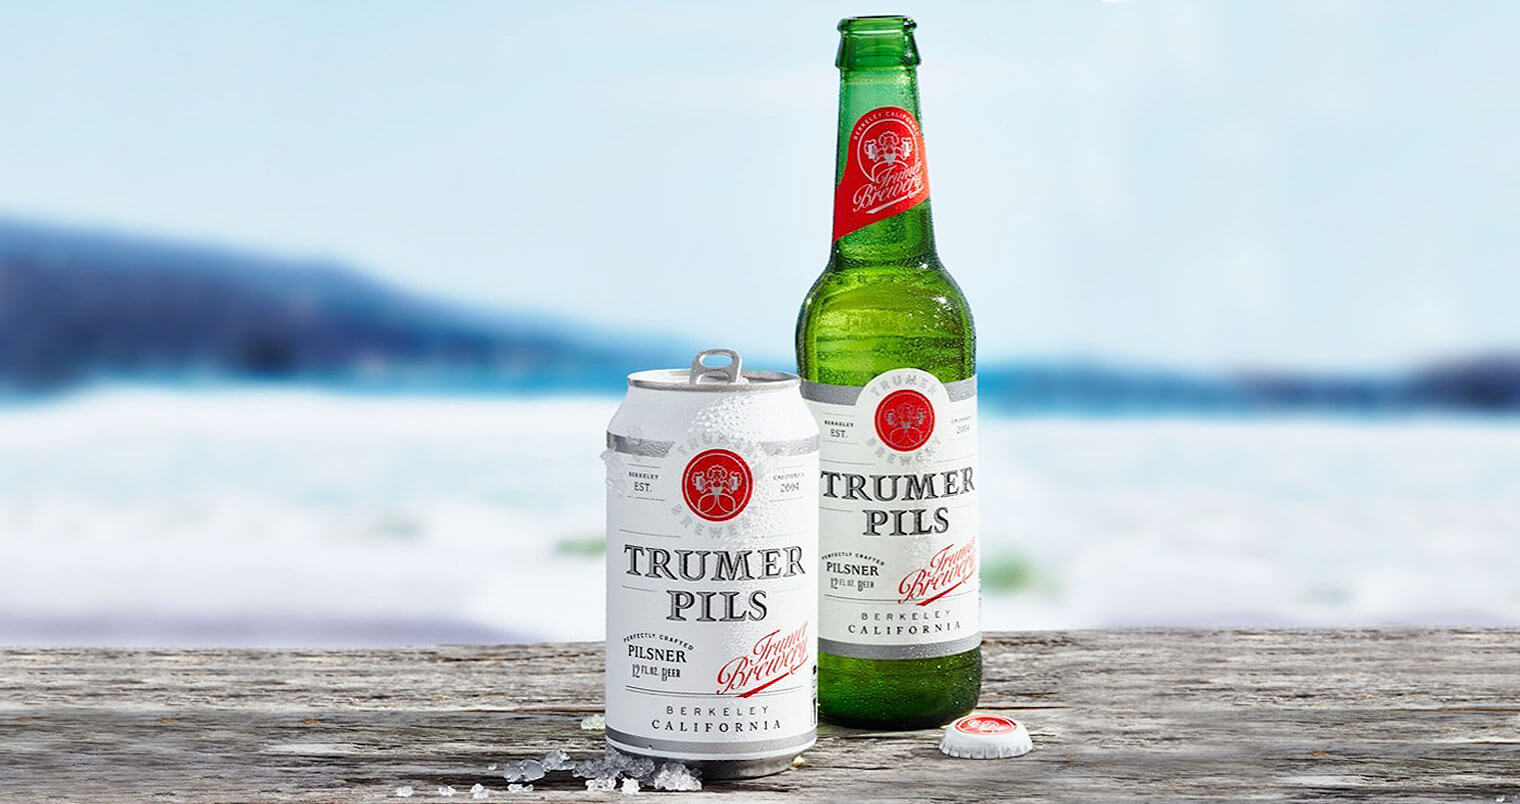 Trumer Pils New Packaging Design, bottle and can, beach scene, featured image